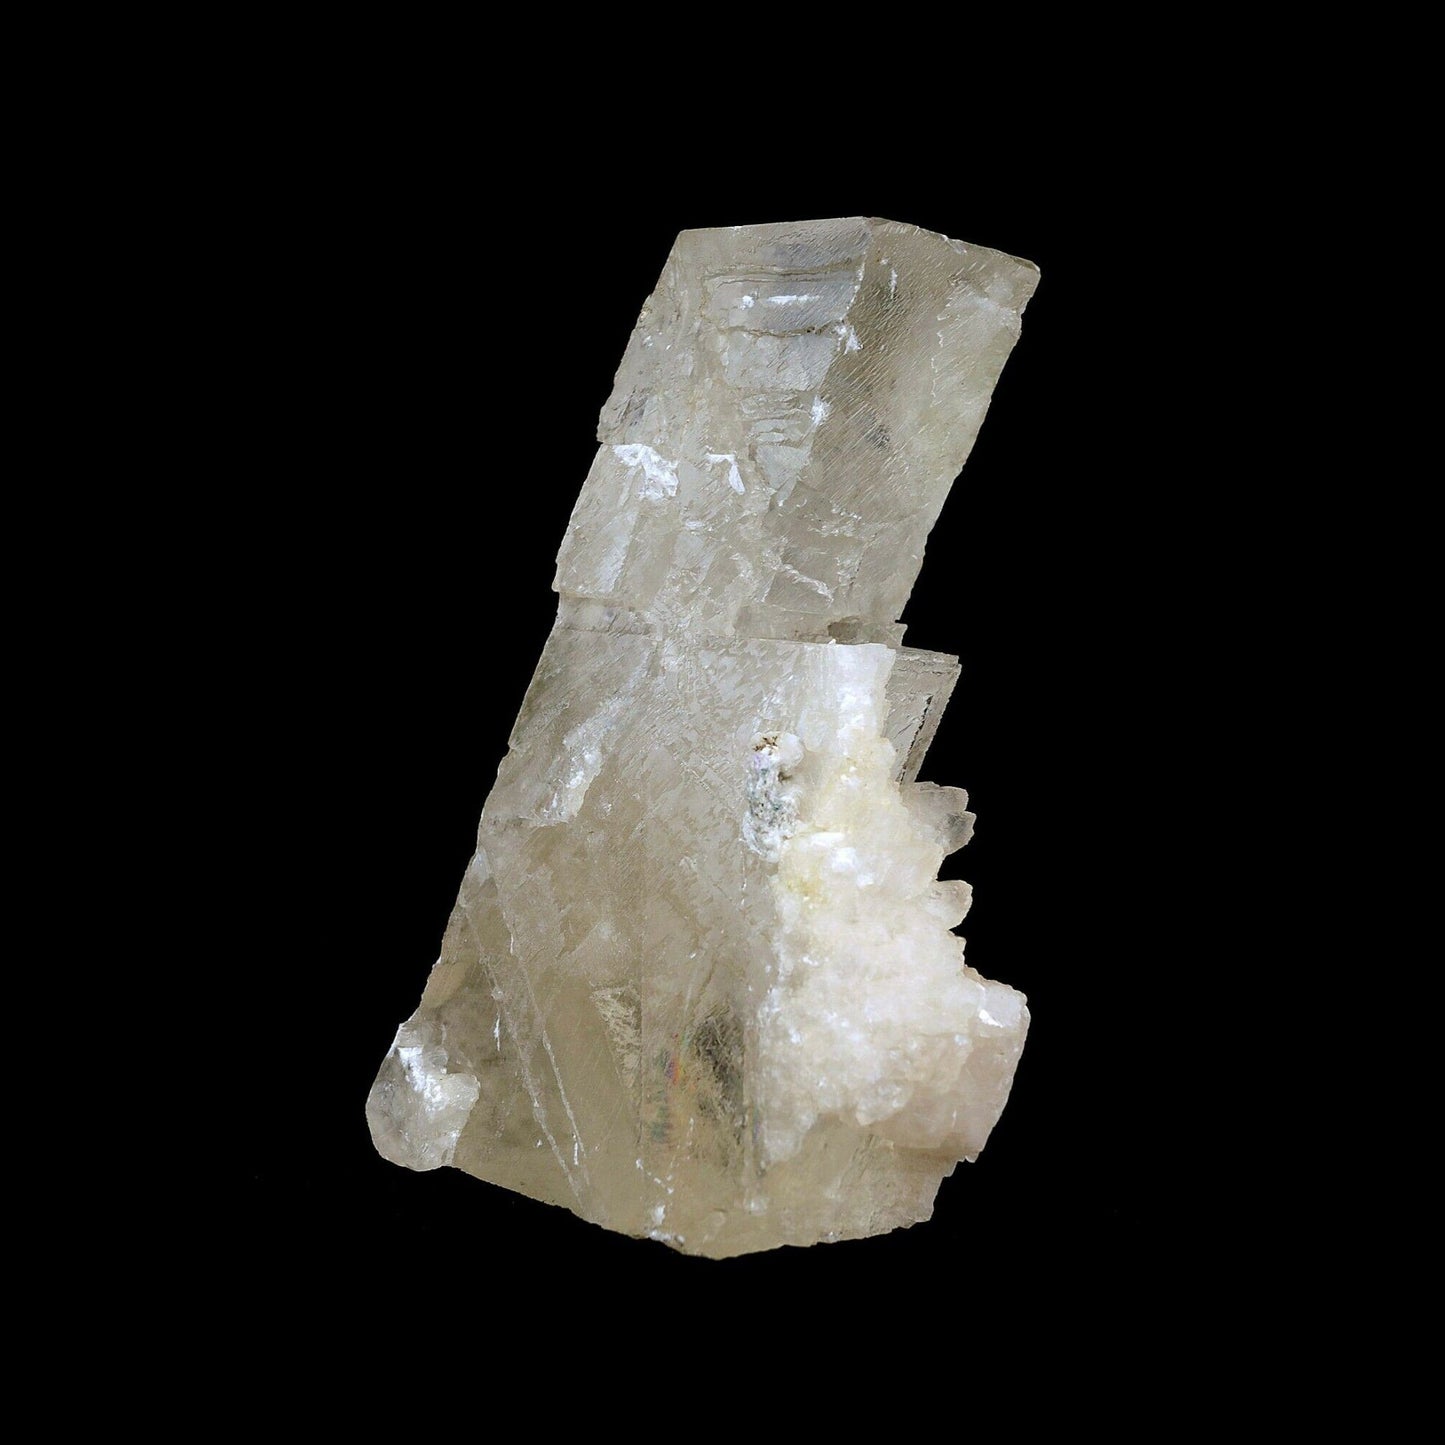 Calcite Unusual Formation Natural Mineral Specimen # B 3621  https://www.superbminerals.us/products/calcite-unusual-formation-natural-mineral-specimen-b-3621  Features:This Calcite is without doubt the most unusual crystal. Classic square formation like steps A sensational and wonderfully aesthetic specimen. Primary Mineral(s): CalciteSecondary Mineral(s): N/AMatrix: N/A14 cm x 8 cm600 GmsLocality: Jalgaon, Maharashtra, IndiaYear of Discovery: 2020